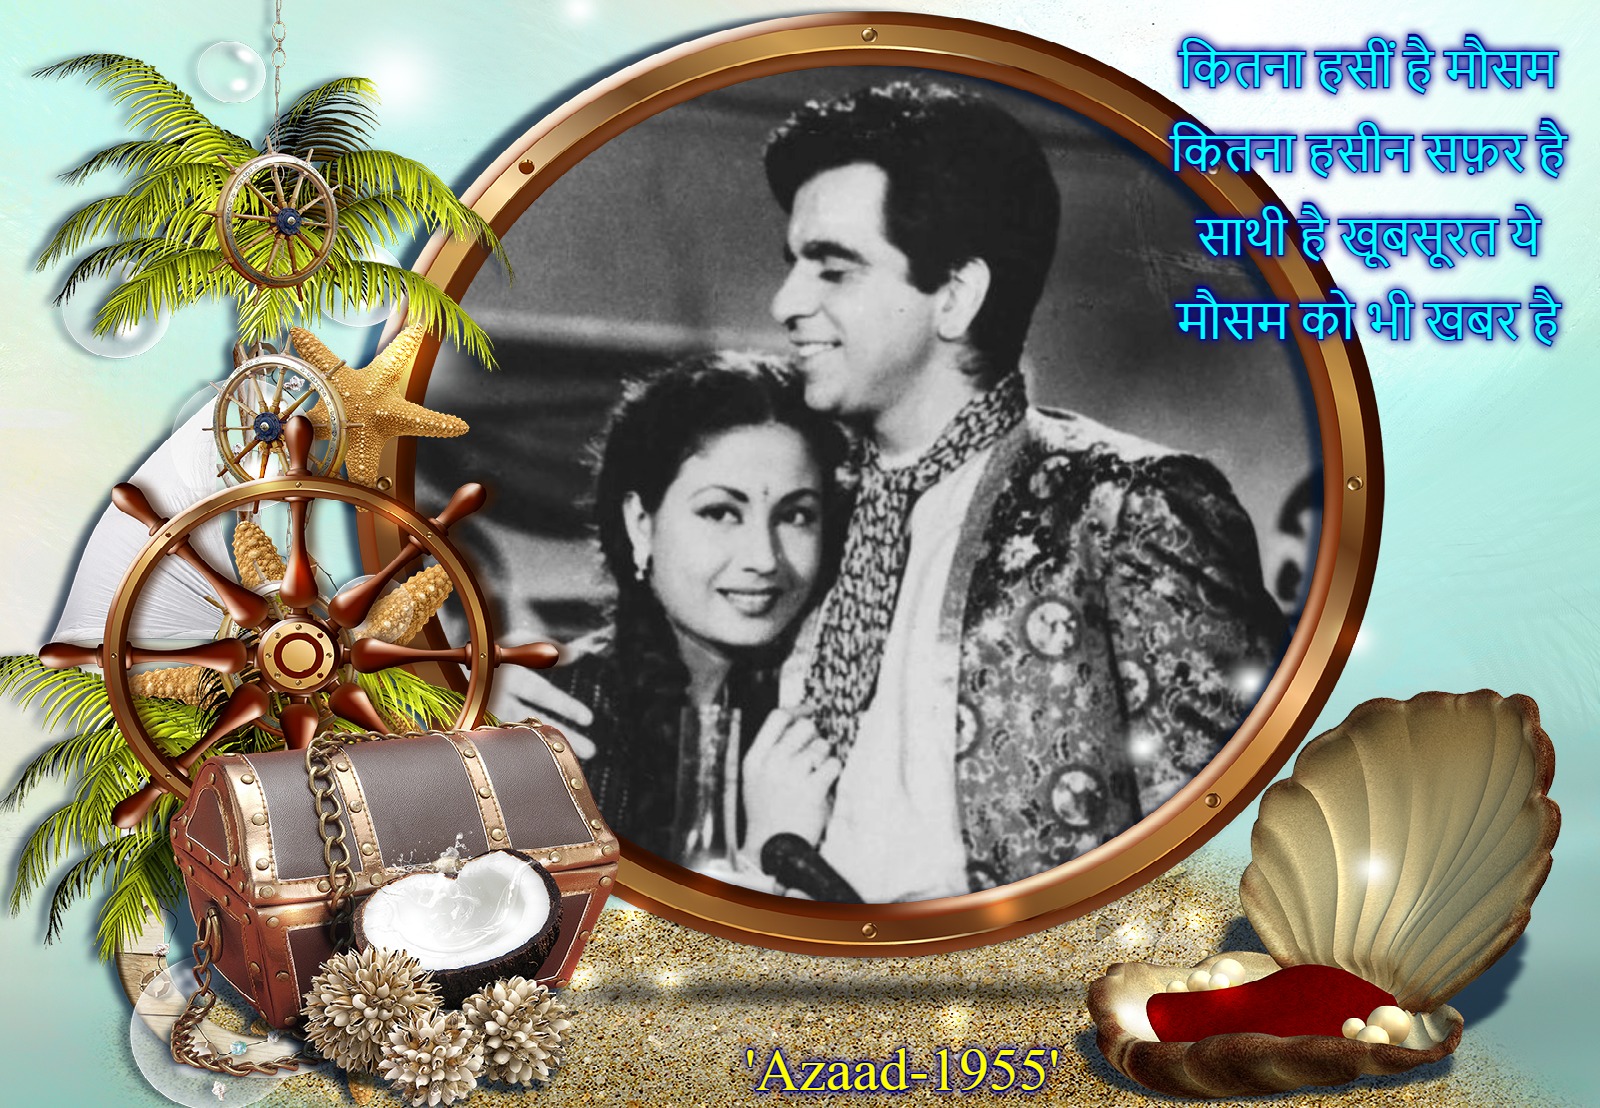 You are currently viewing “Remembering Dilip Kumar On His Death Anniversary”